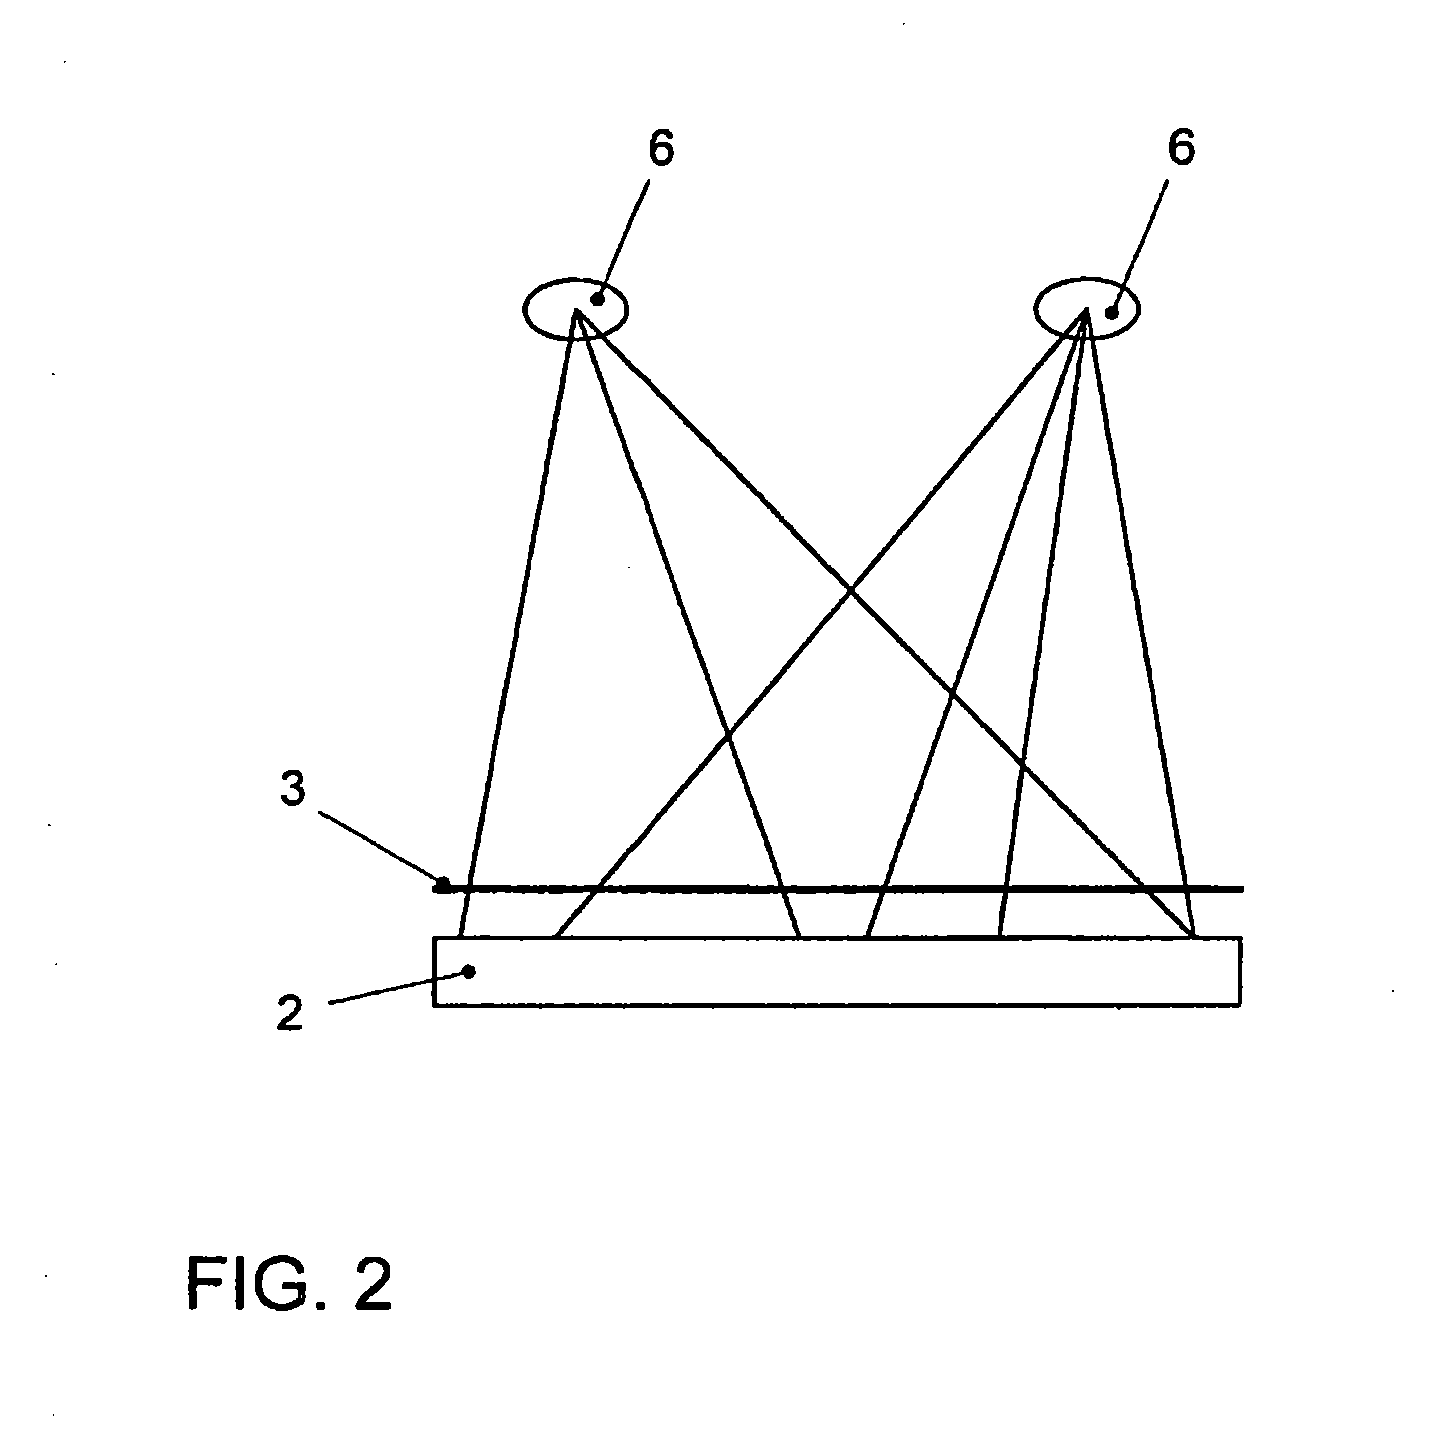 Method for Representing Items of Information in a Means of Transportation and Instrument Cluster for a Motor Vehicle